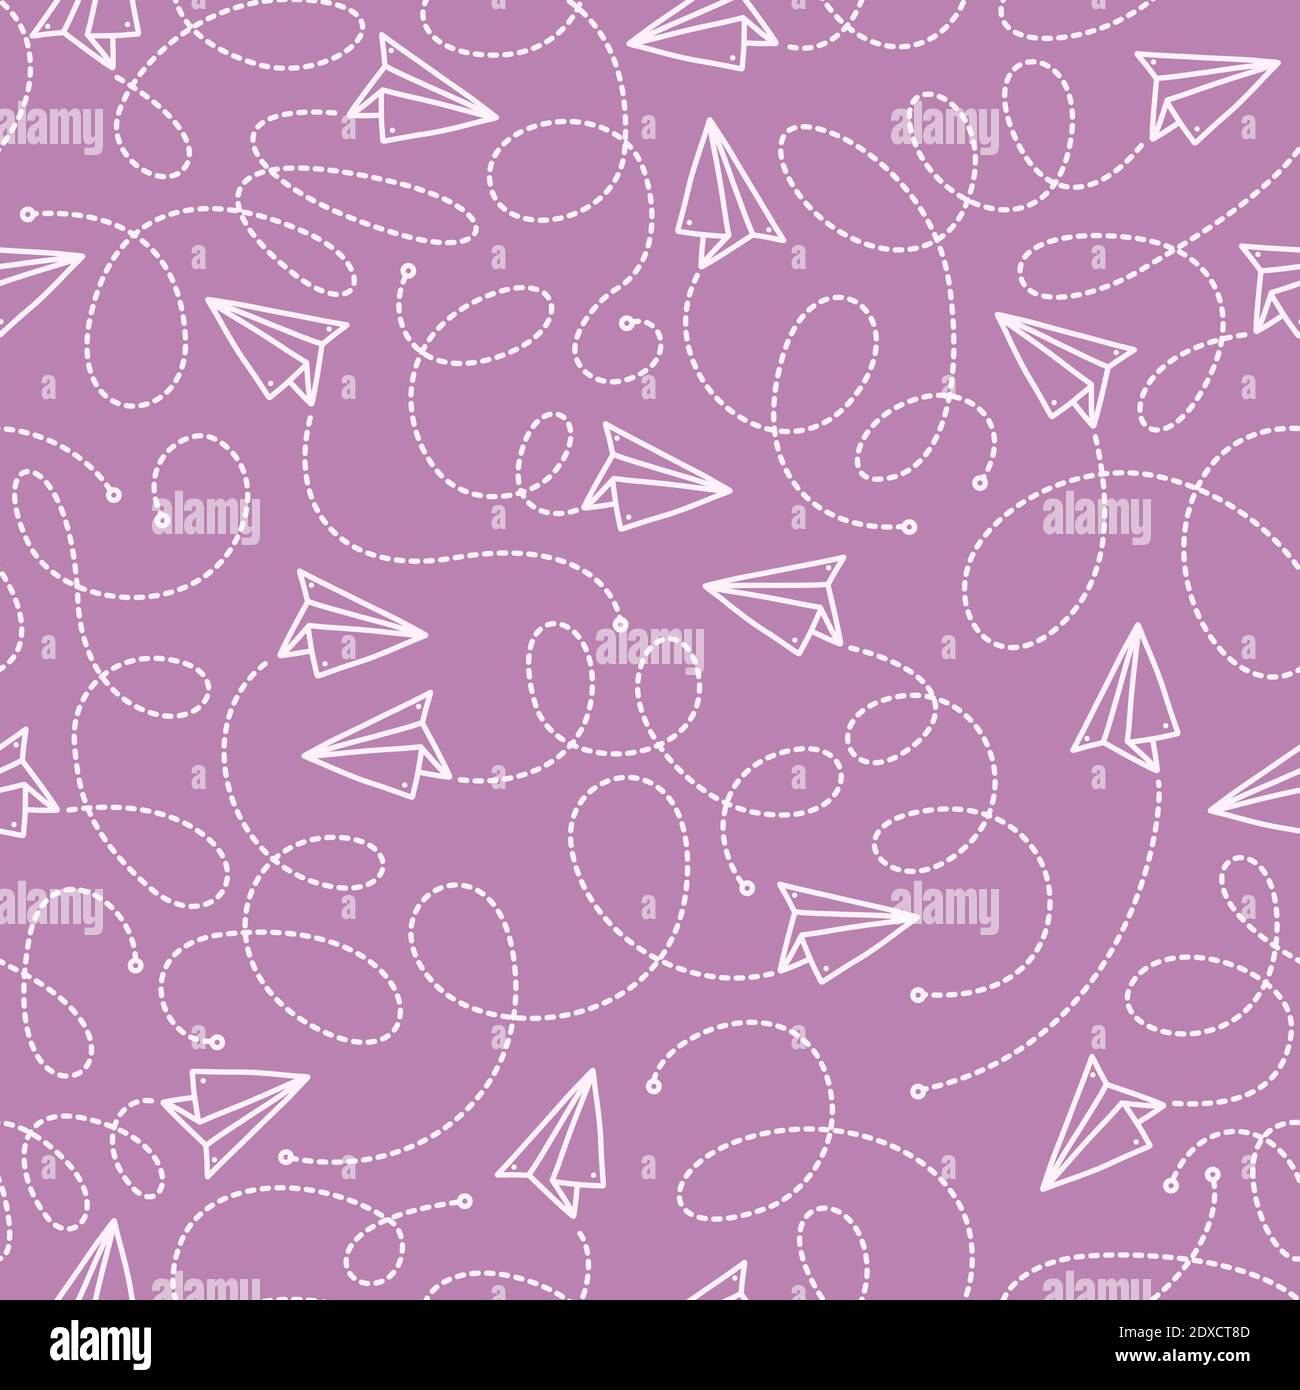 Seamless pattern with handmade paper plane. Hand drawn vector illustration in doodle style. Print with origami planes. Vector illustration in doodle Stock Vector